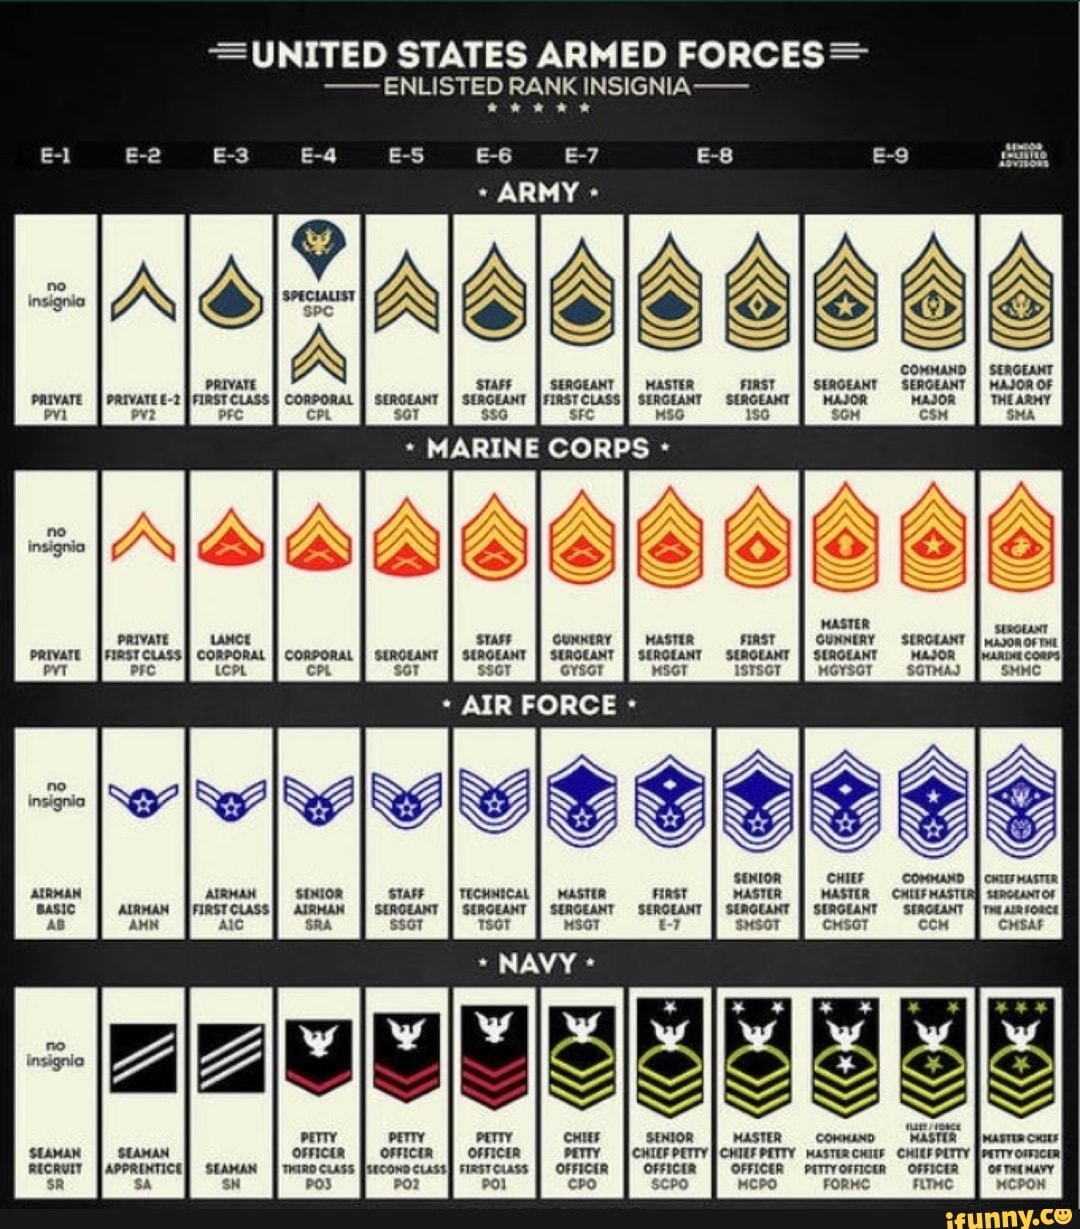 No insignia =UNITED STATES ARMED FORCES> ENLISTED RANK INSIGNIA-- ARMY ...